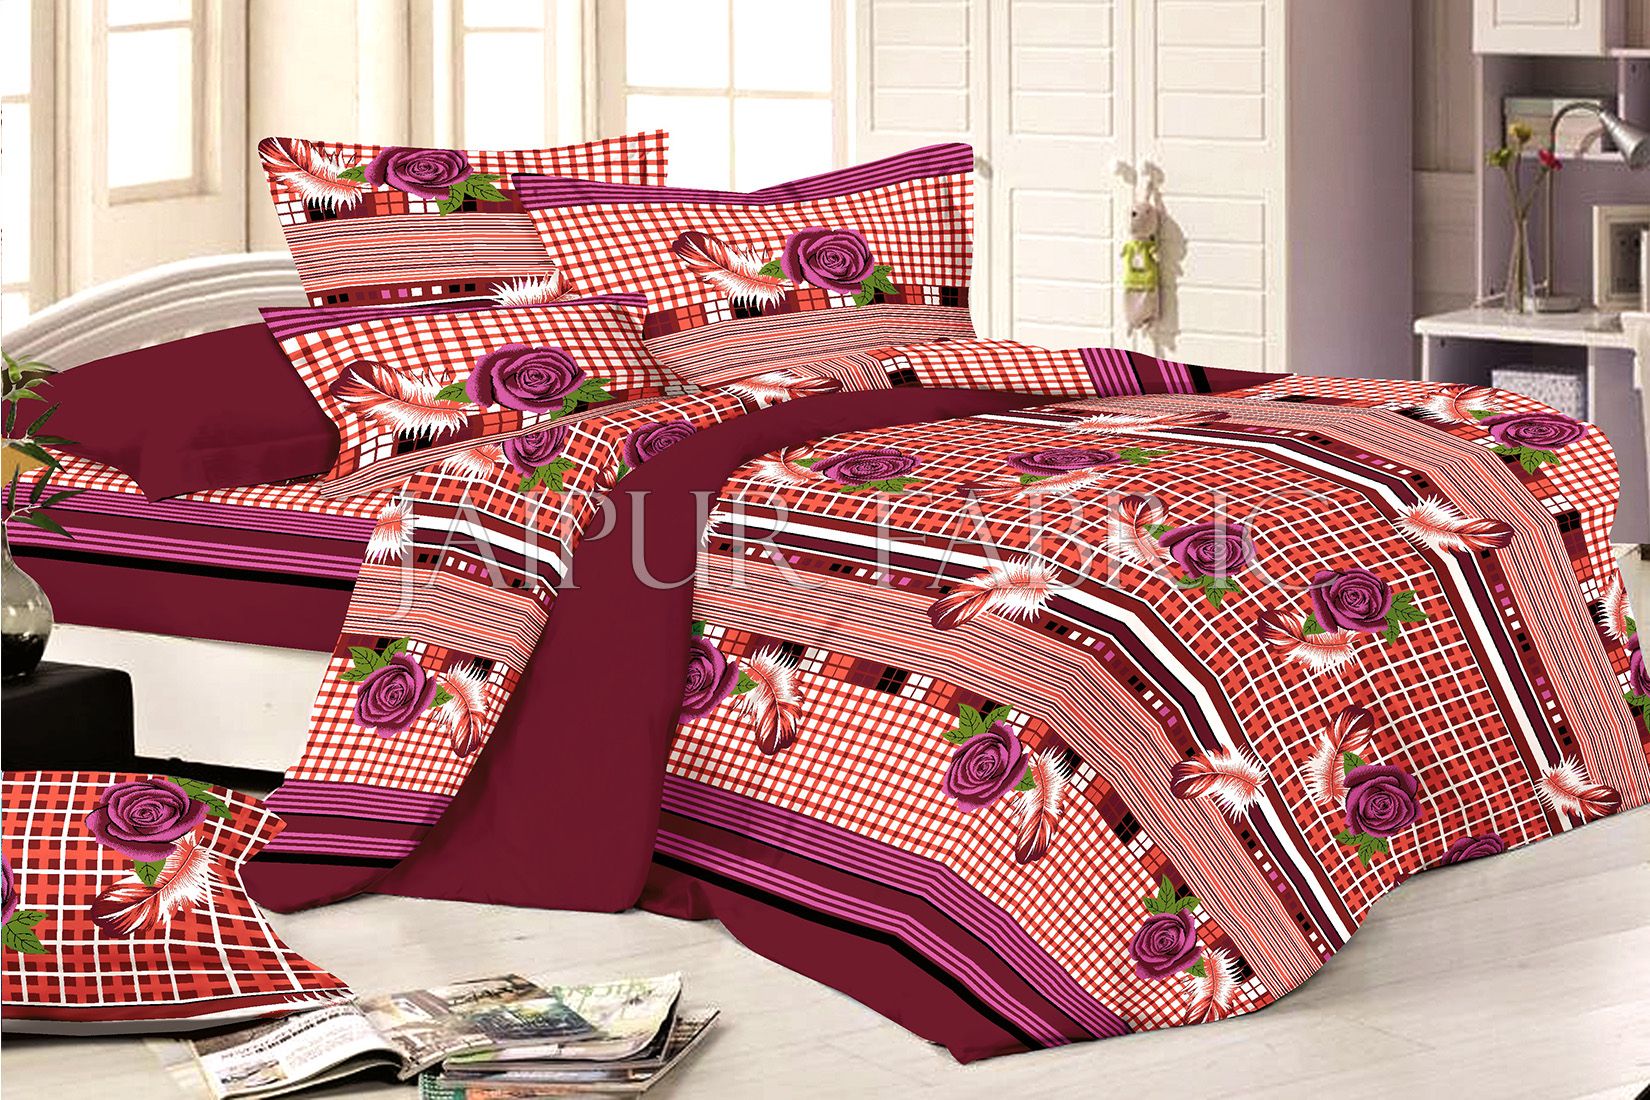 Maroon Base Flower and Feather Print Double Bed Sheet